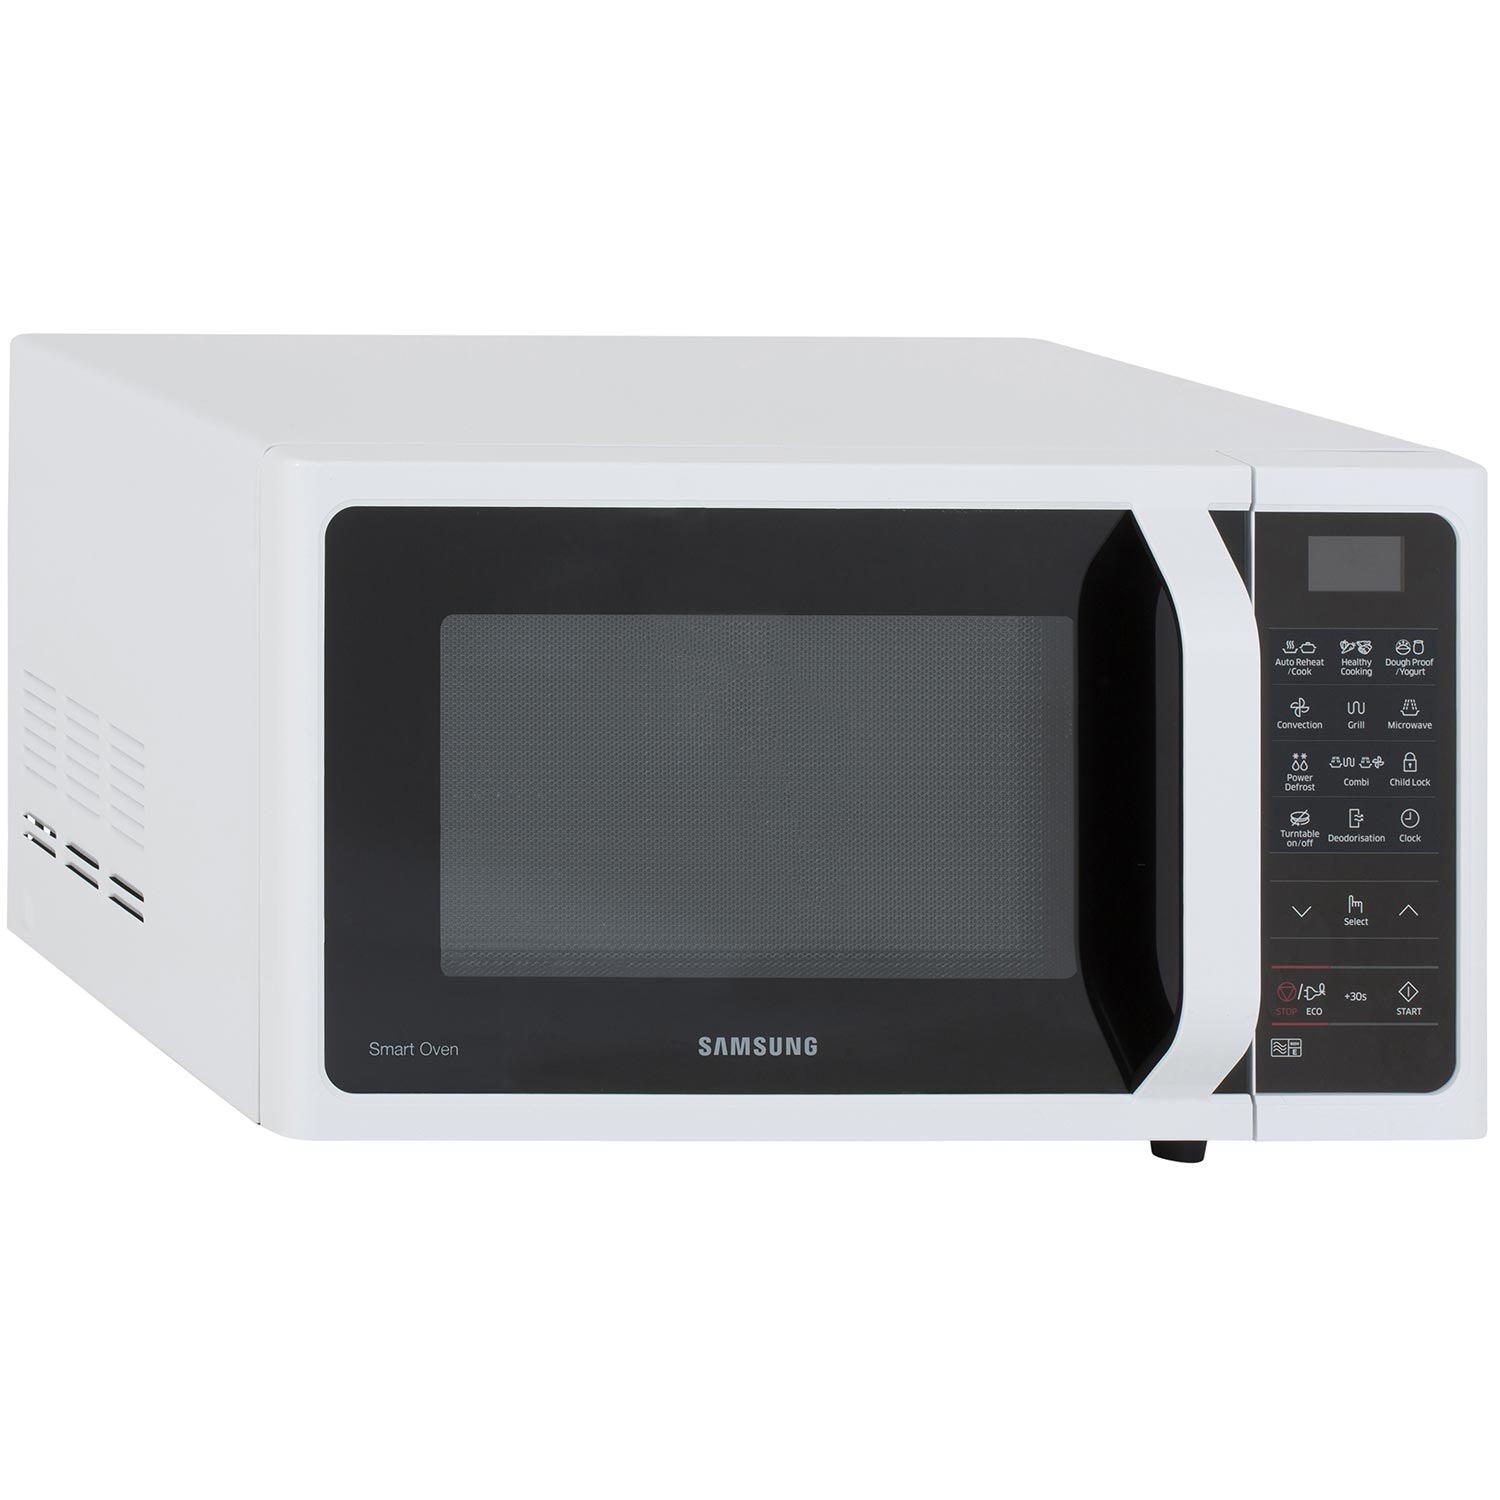 Samsung 28 Litre Combination Microwave - White - 2